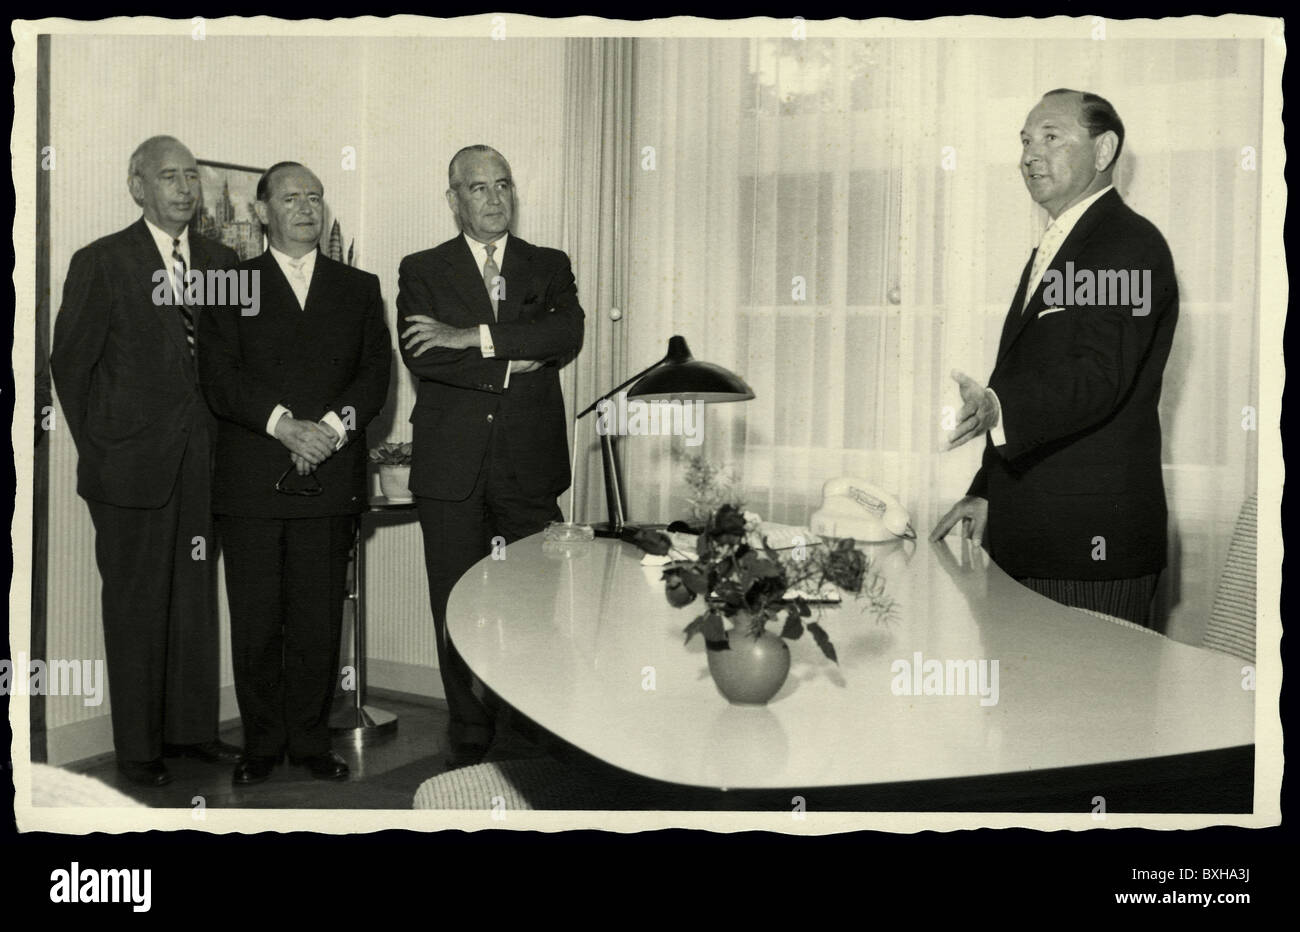 office, managing board of a medium-sized company, chairman welcoming his fellow board members, Germany, circa 1955, Additional-Rights-Clearences-Not Available Stock Photo